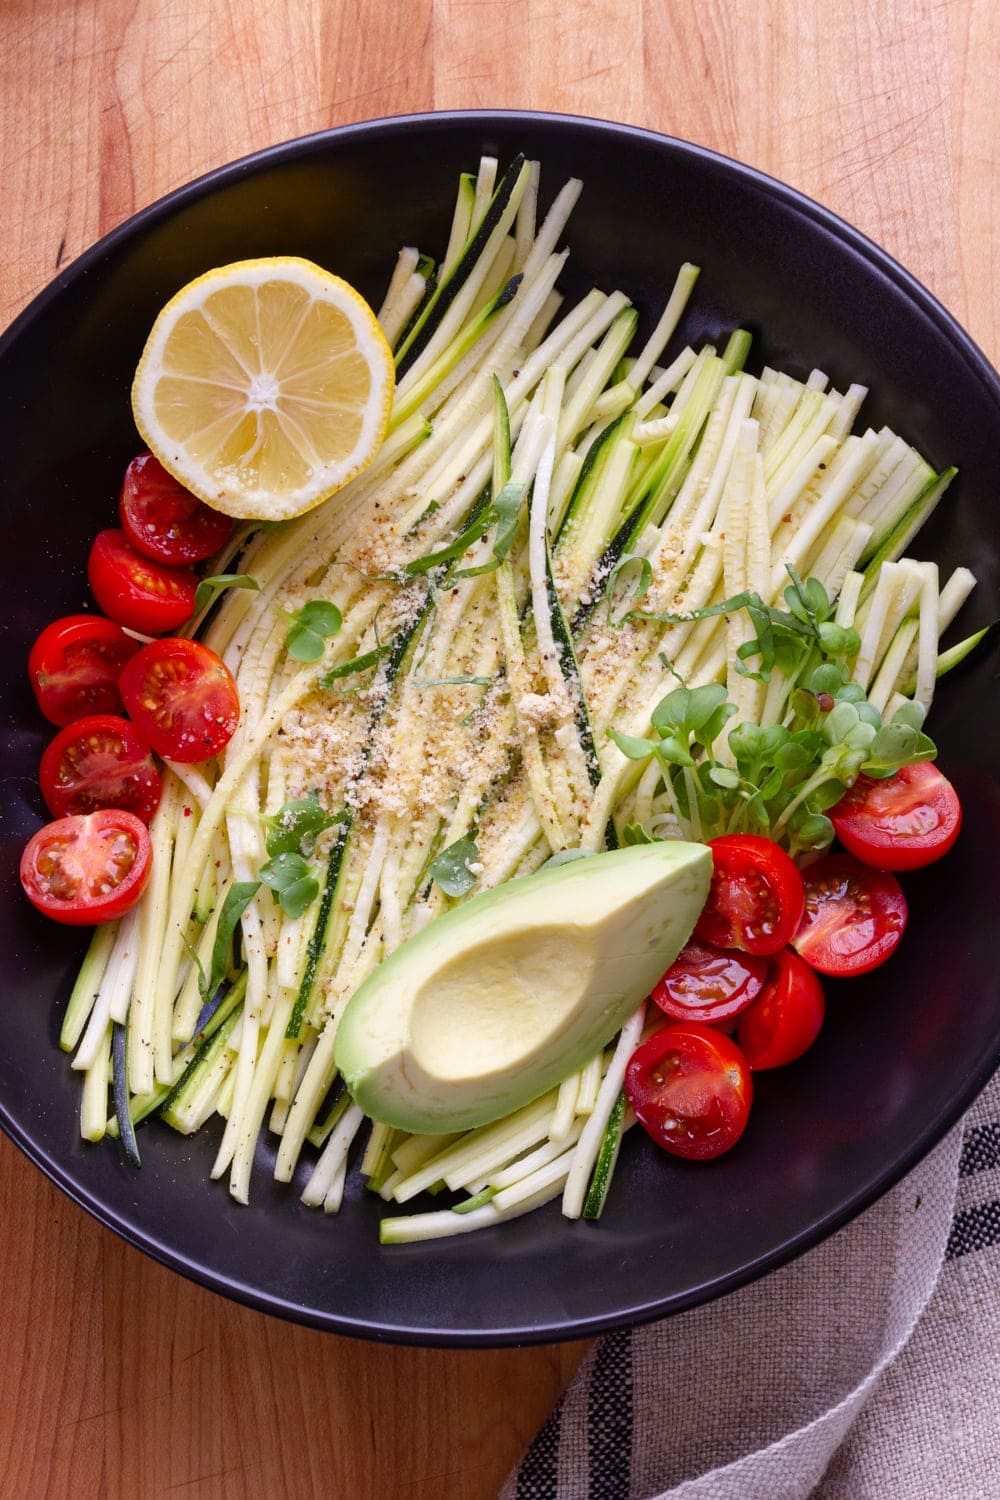 zucchini pasta with tomatoes, avocado, lemon, micro sprouts and almond parmesan in a black bowl on a wooden cutting board